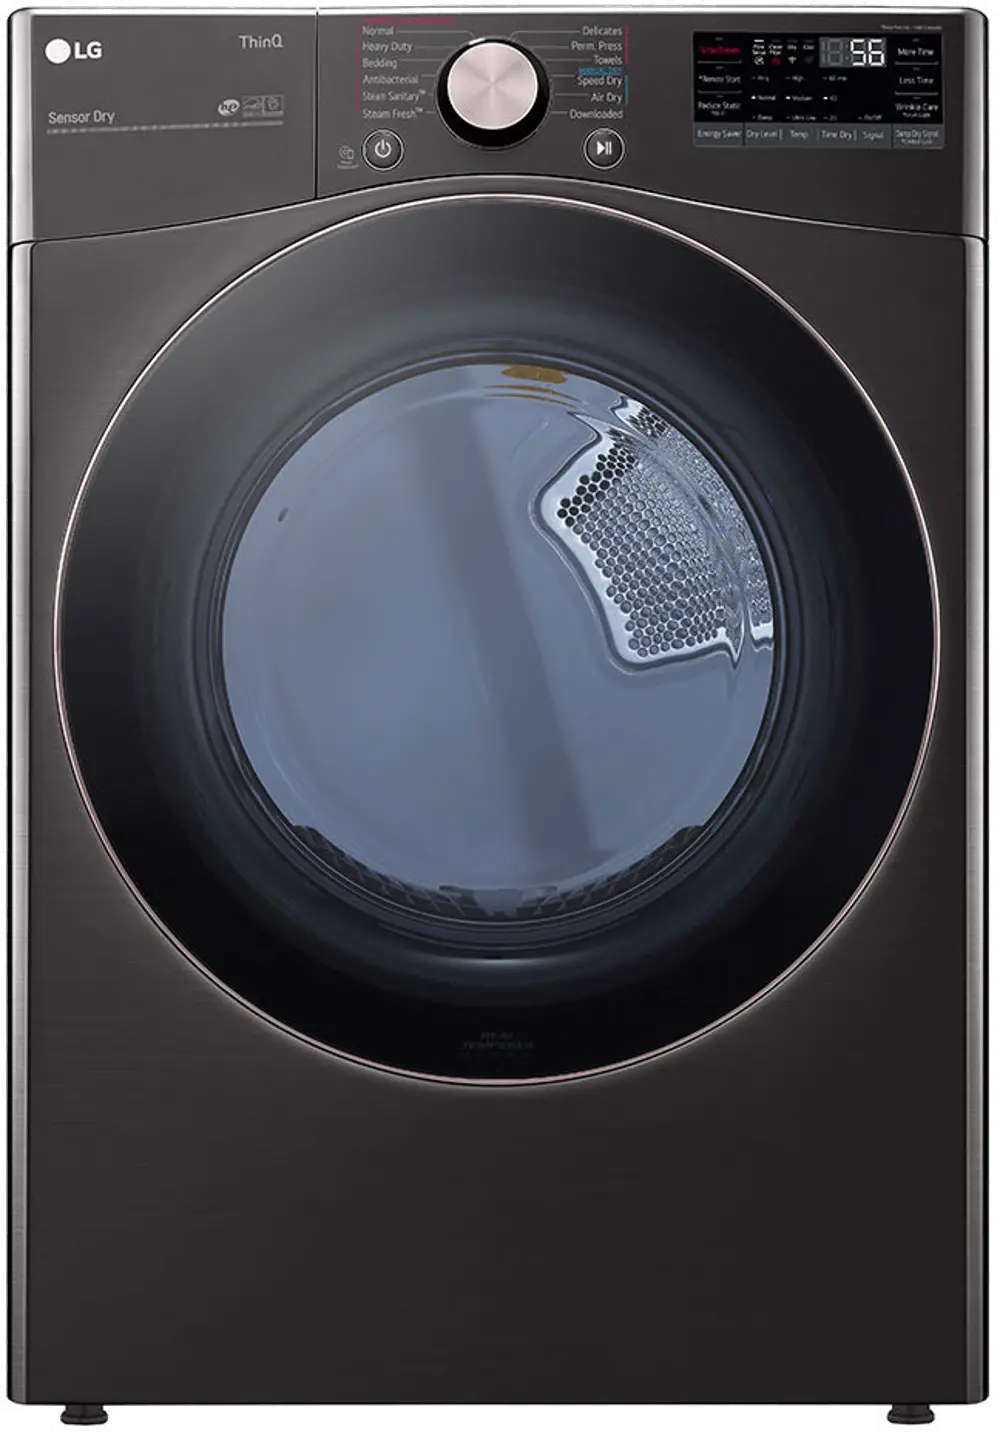 DLGX4001B LG Smart Front Load Gas Dryer with TurboSteam and Built-In Intelligence - 7.4 cu. ft. Black Steel-1